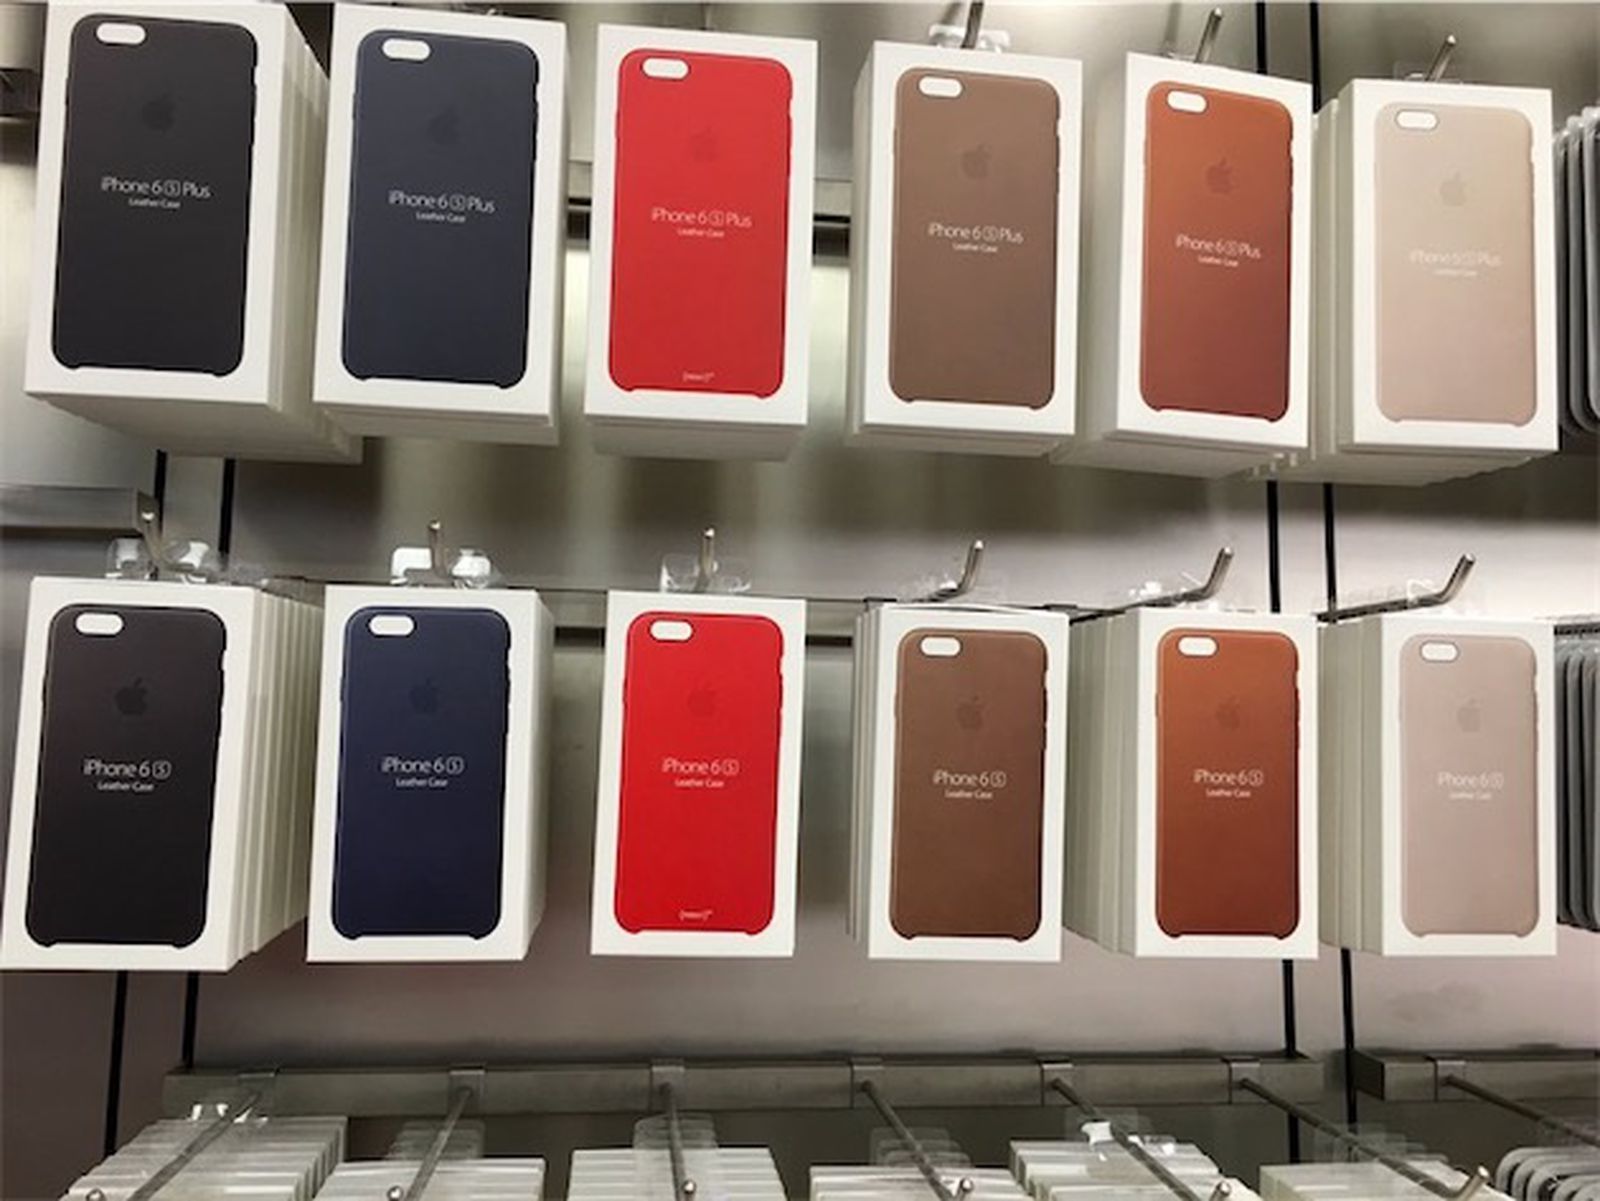 Dom Intens belegd broodje Apple Releases (PRODUCT)RED Leather Cases for iPhone 6s and 6s Plus -  MacRumors